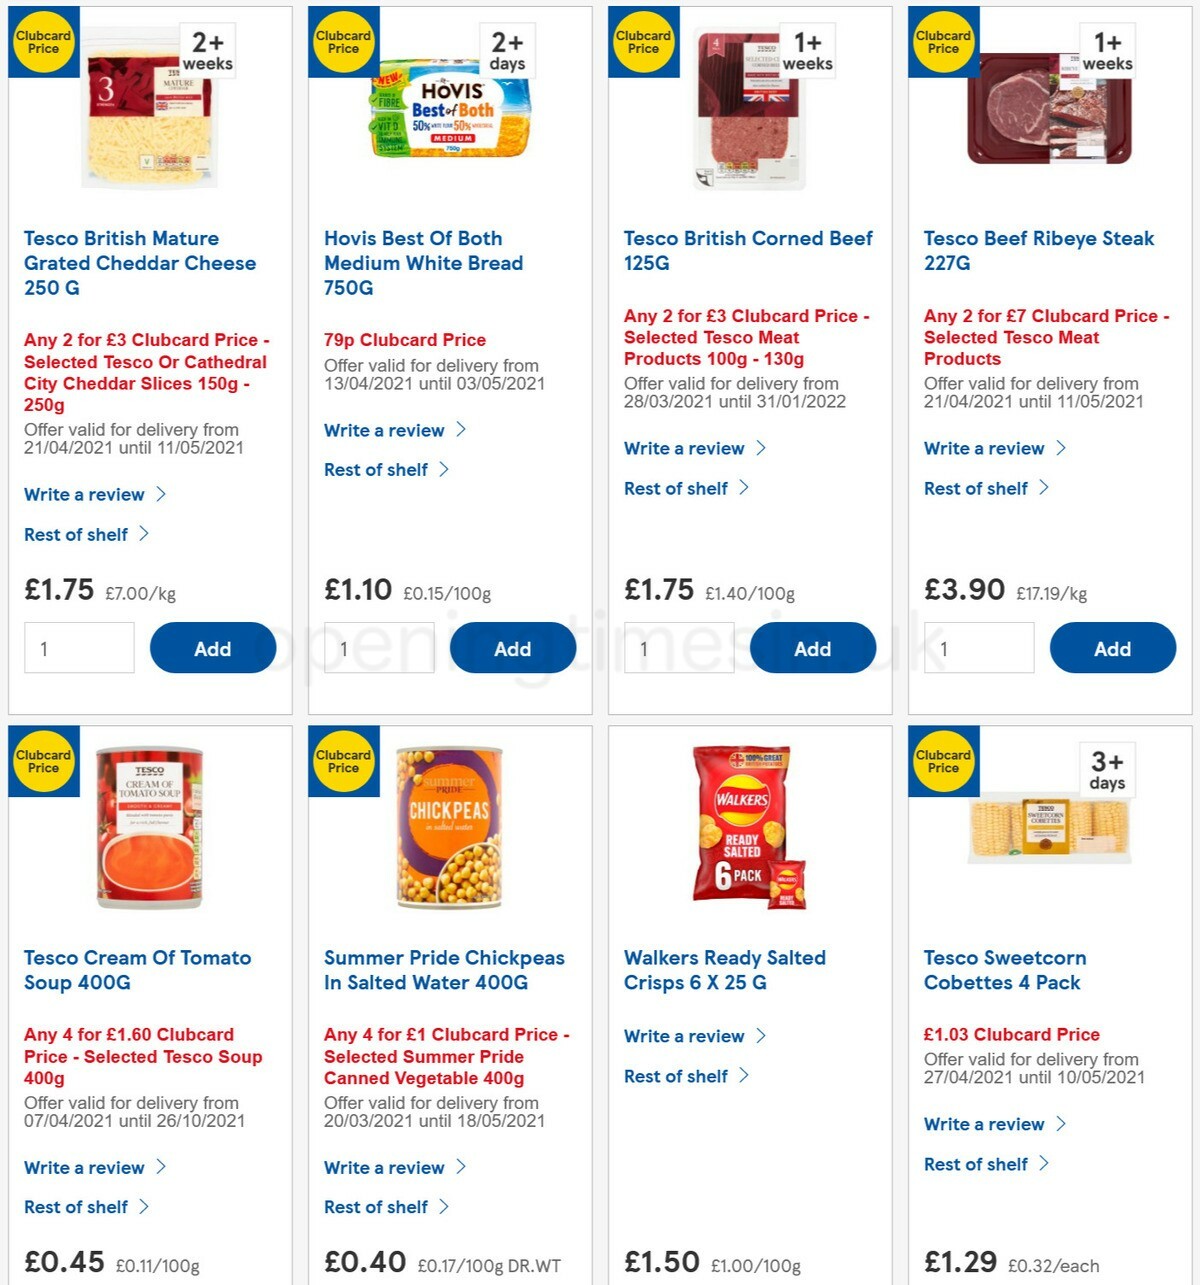 TESCO Offers from 28 April